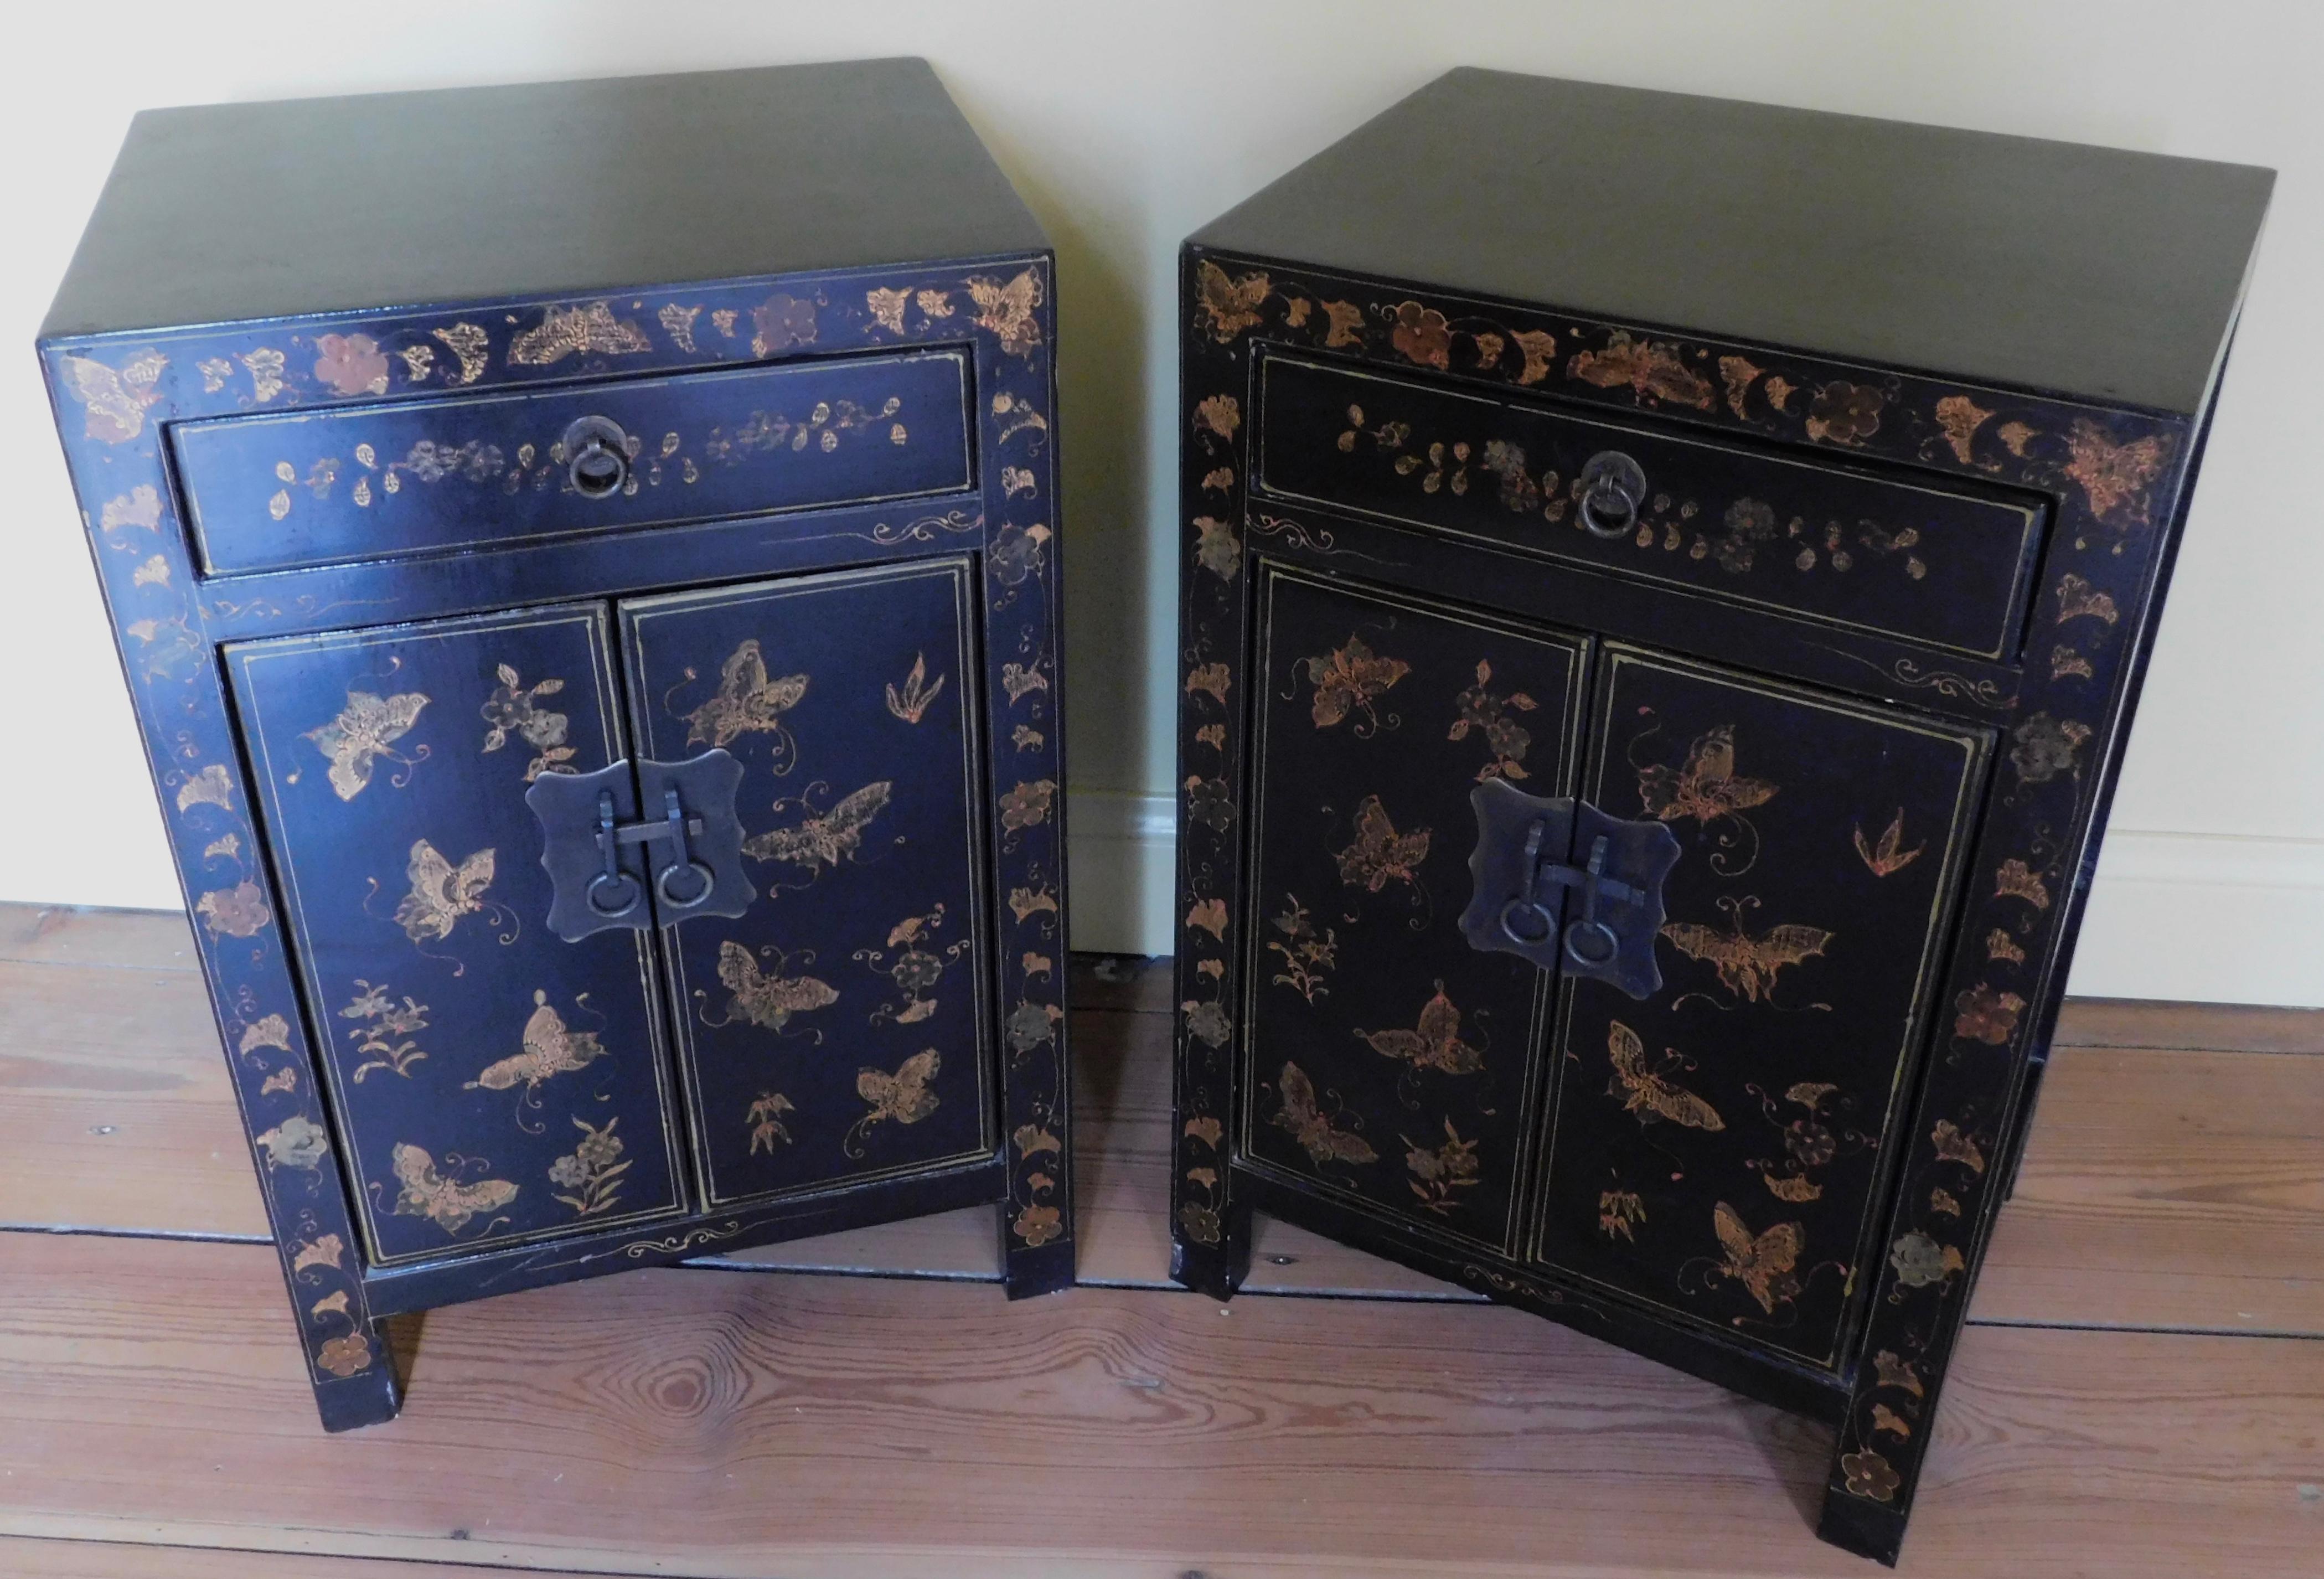 A pair of early 20th century Chinese black lacquer chinoiserie cabinets perfectly elegant in a traditional or modern décor.